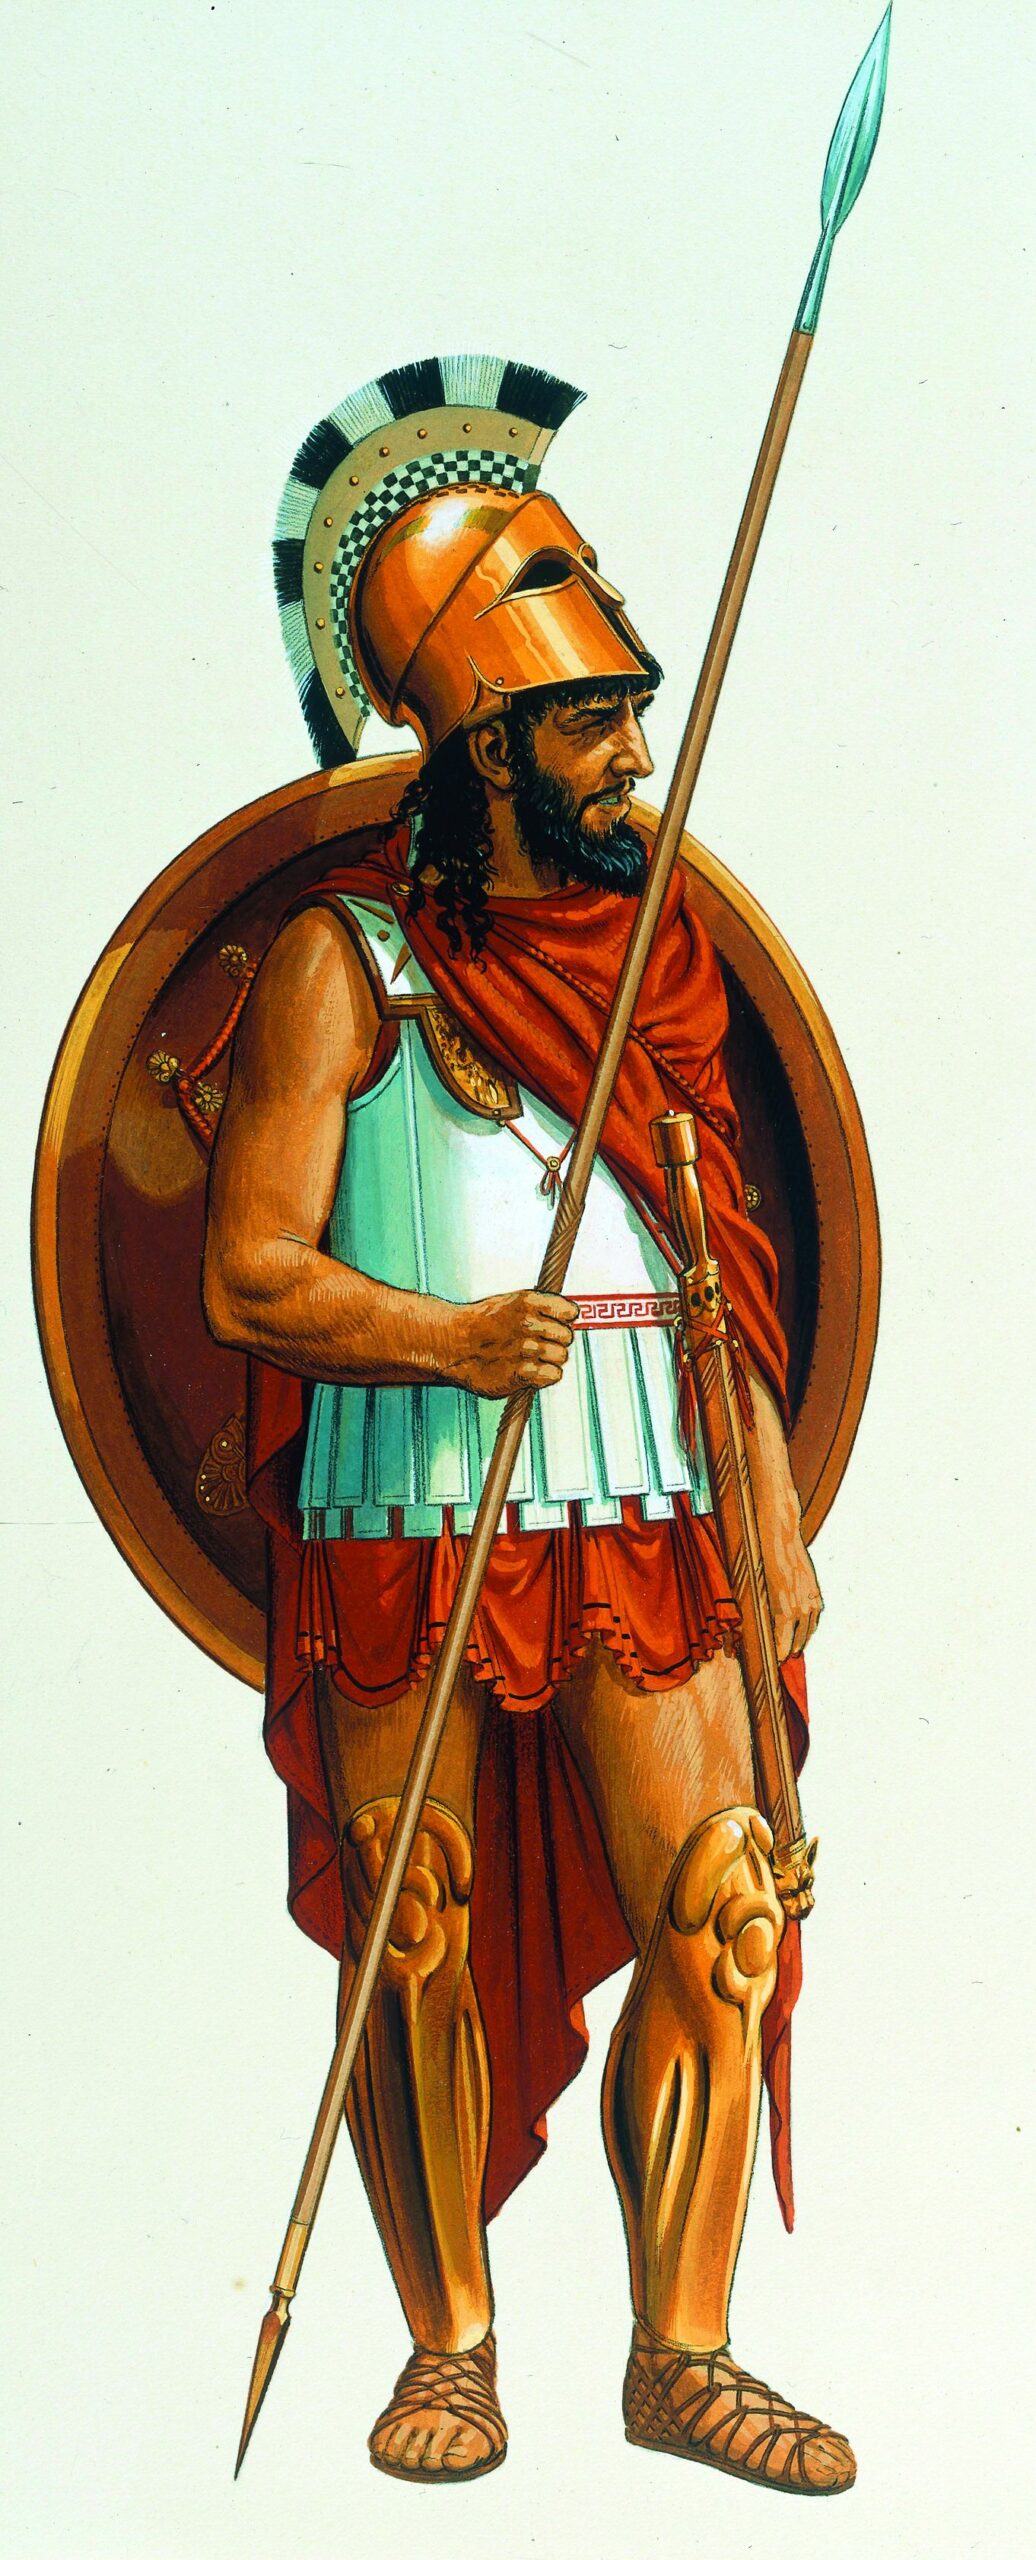 A fully armored Spartan hoplite wears a Corinthian helmet and sports greaves, spear, sword, and shield in this watercolor by Peter Connolly.